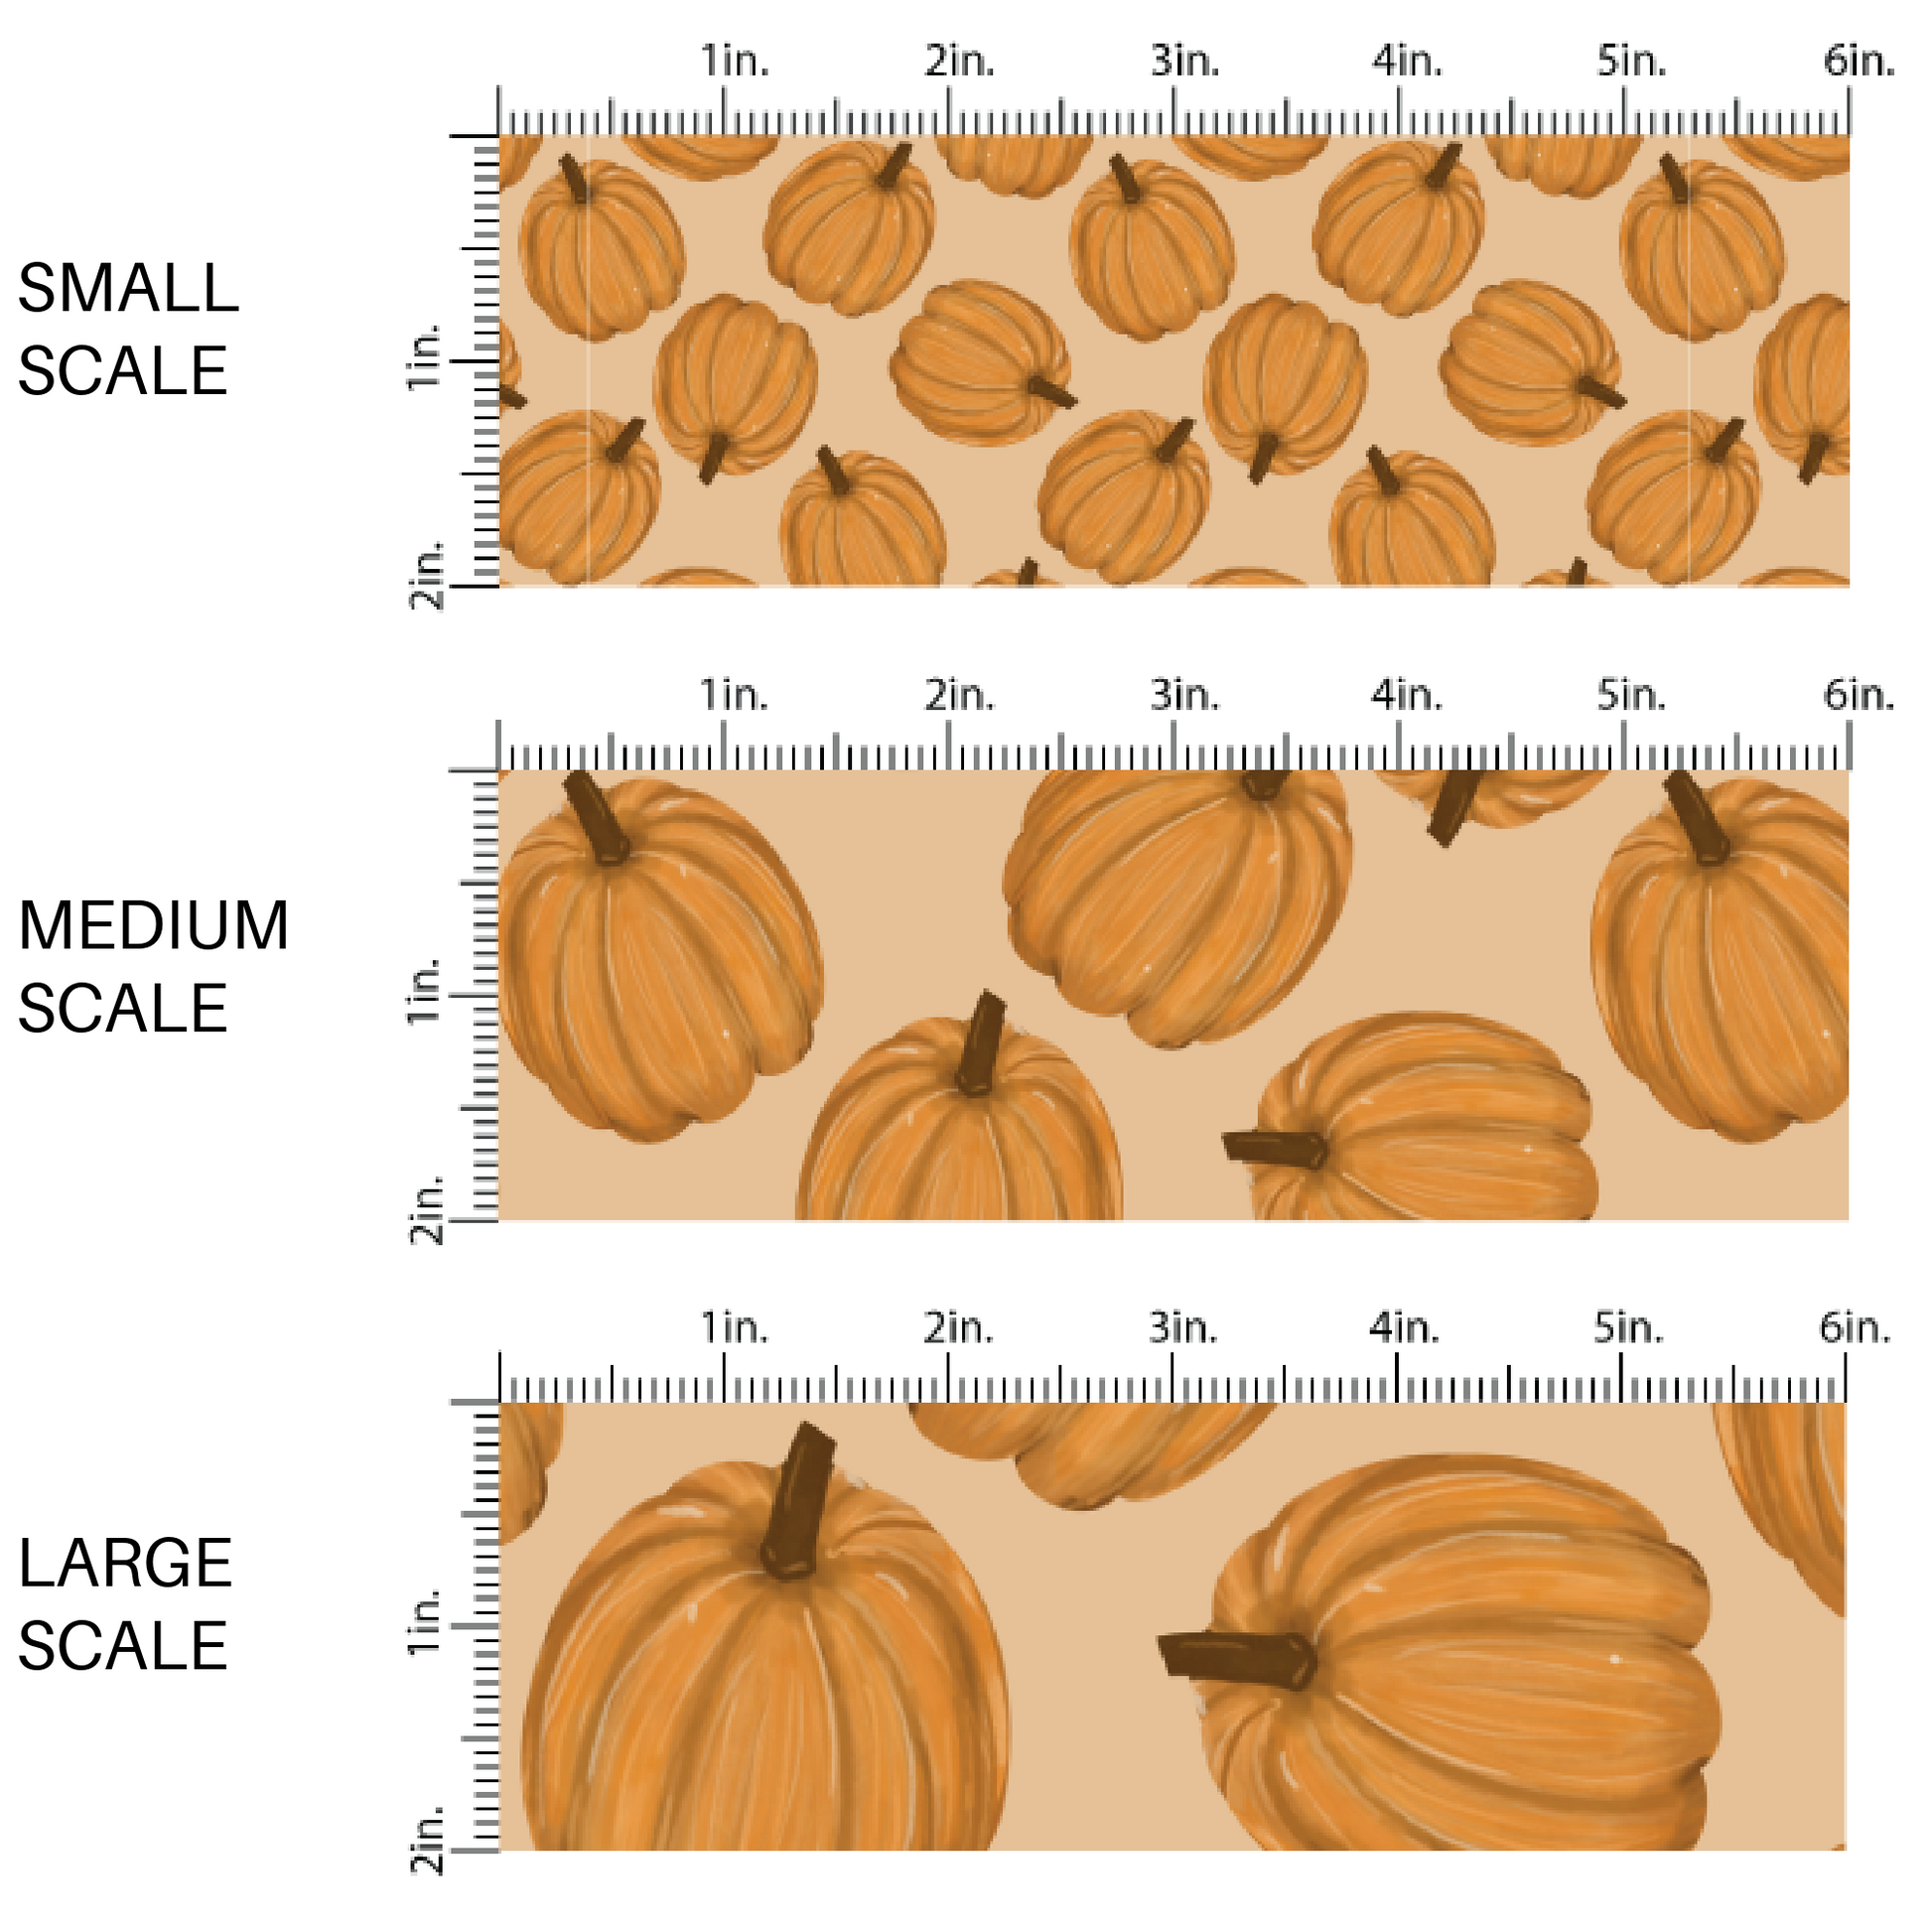 Orange fabric by the yard scaled image guide with scattered orange pumpkins.